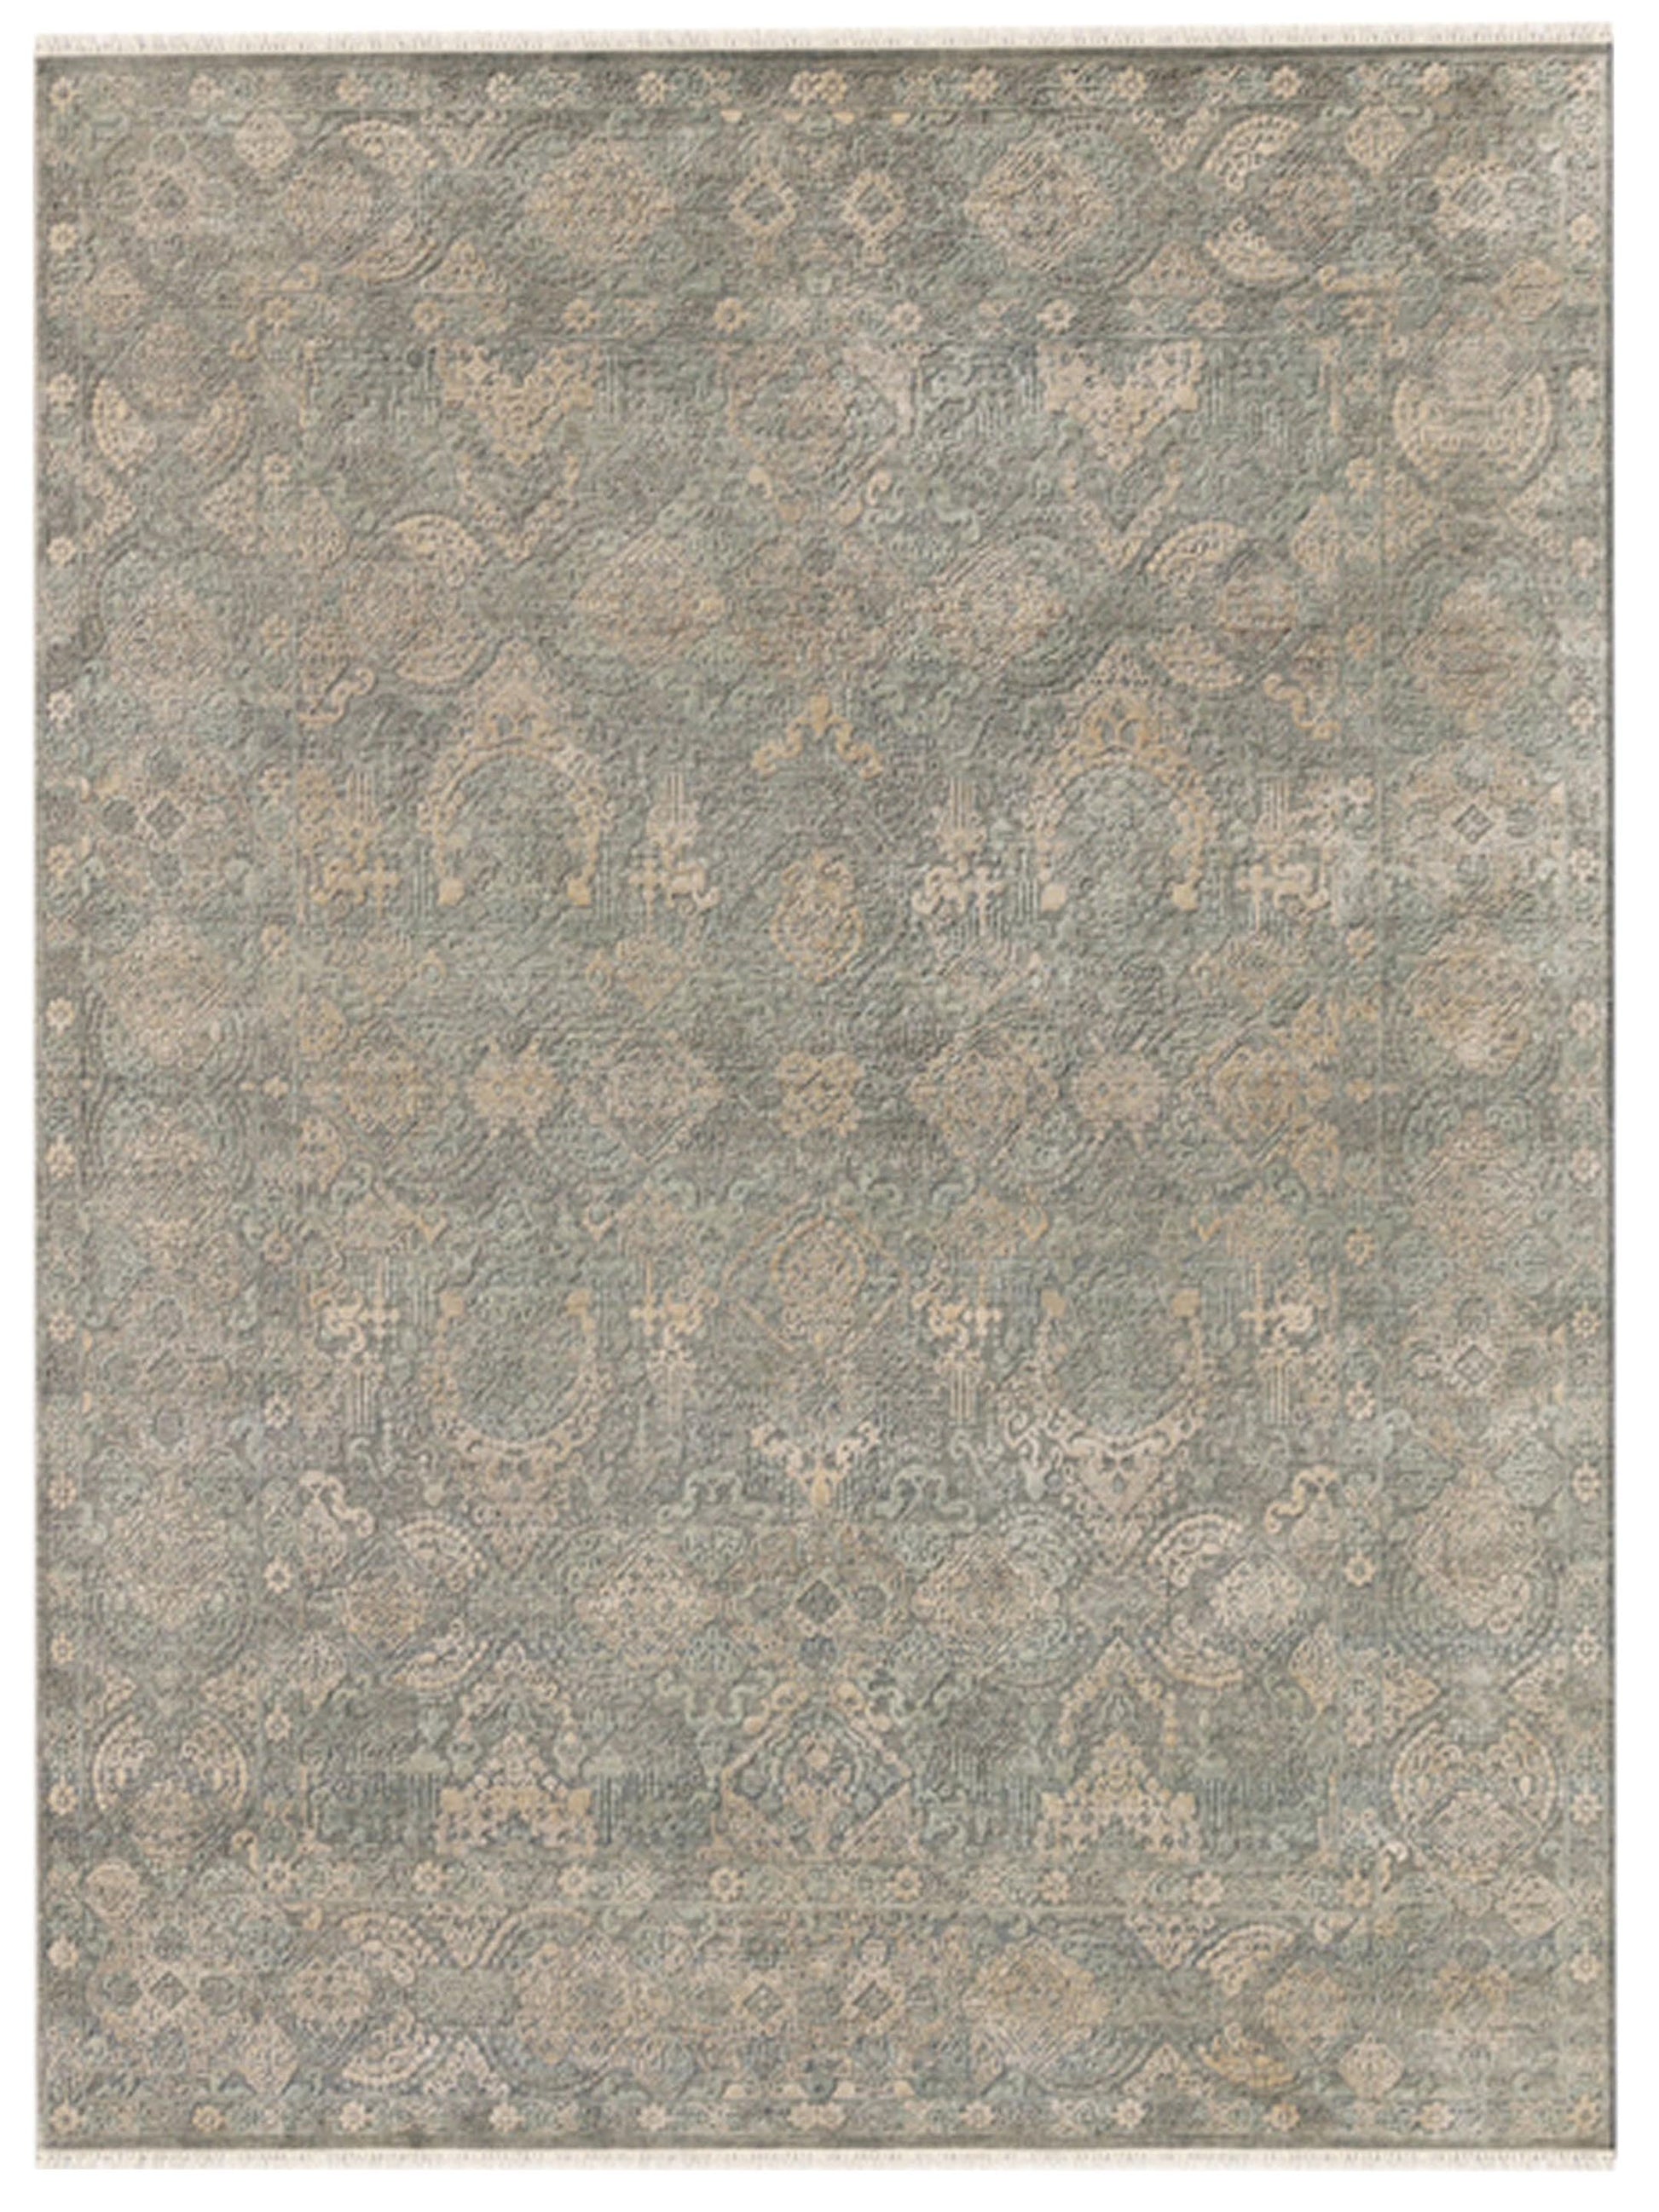 Limited Shoreham SHO-155 Forest Gray Transitional Knotted Rug